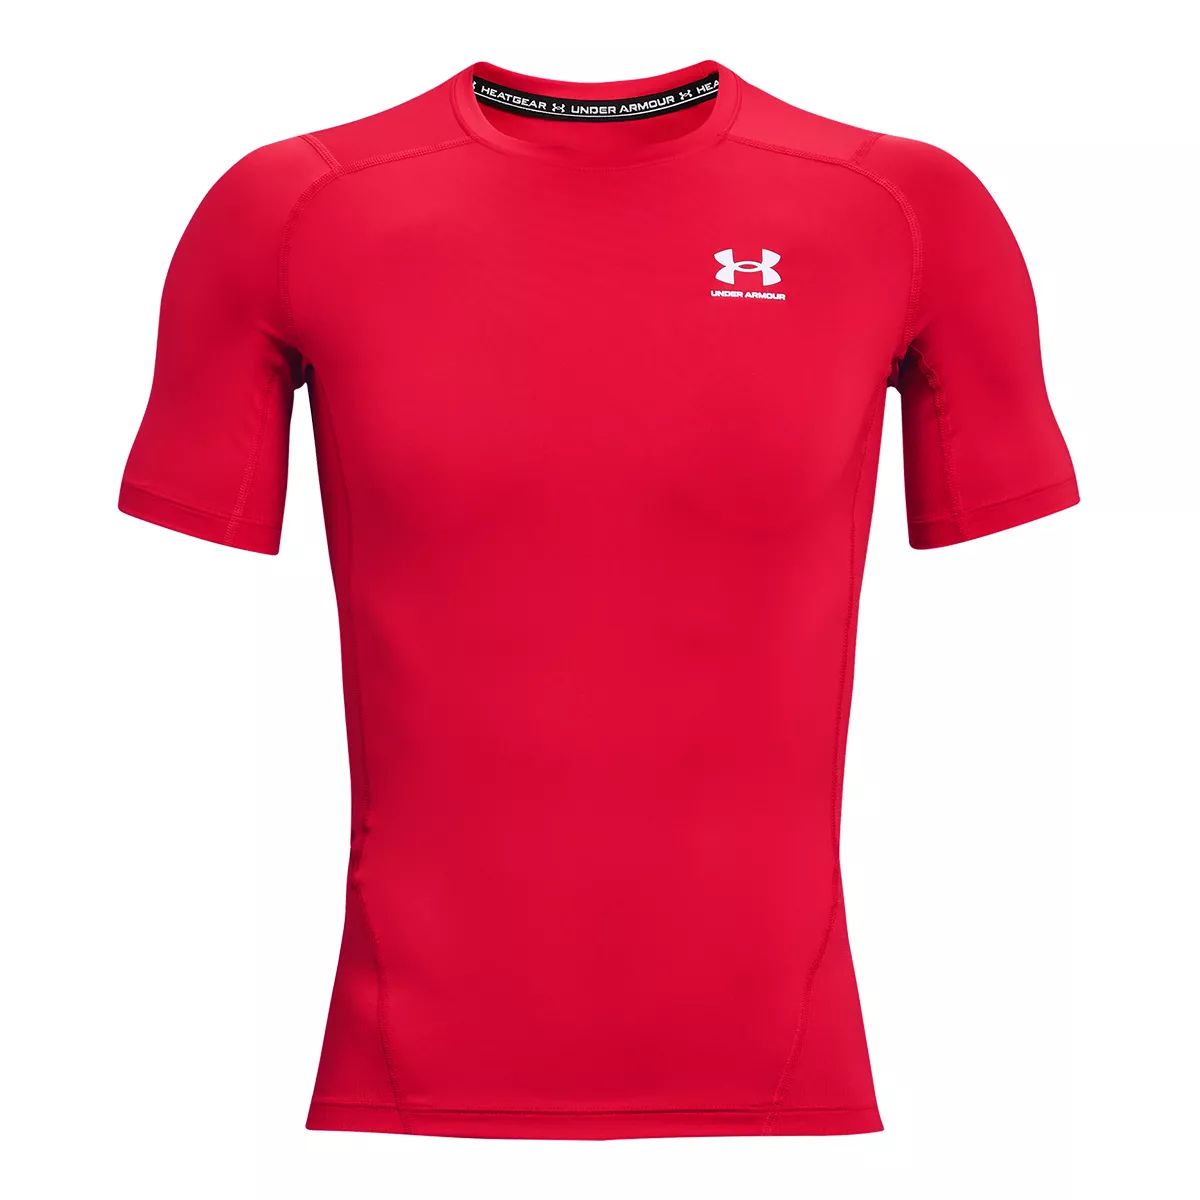 Under Armour Ae Spiderman Compression Tshirt in Red for Men